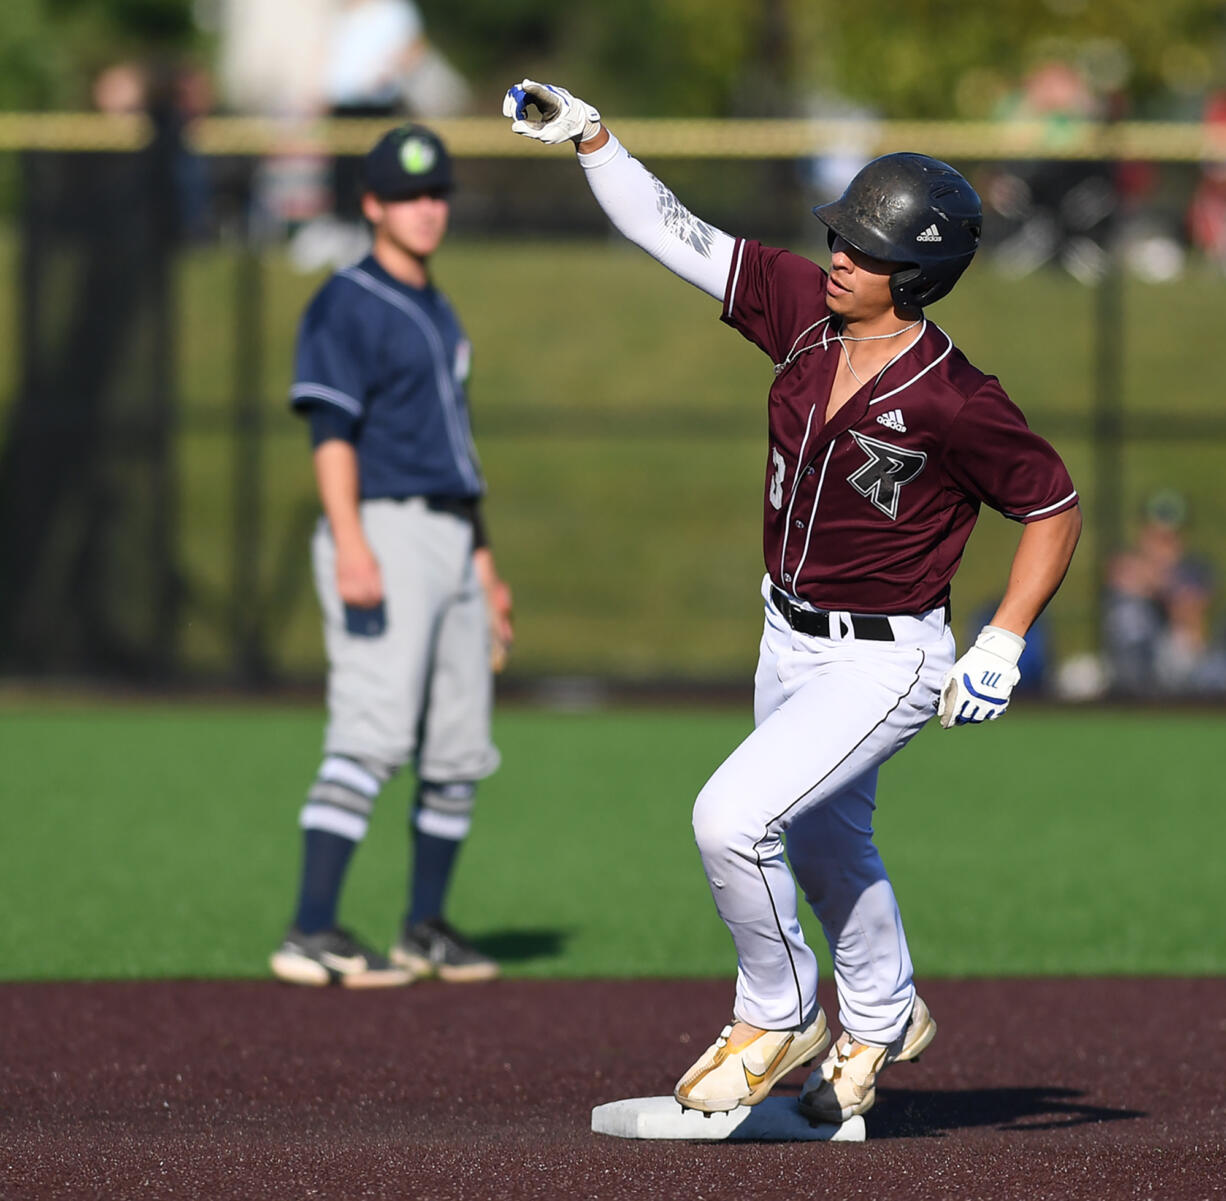 Raptors outfielder Jacob Sharp points as he rounds second base after a home run Tuesday, June 28, 2022, during a game between the Ridgefield Raptors and the Portland Pickles at the Ridgefield Outdoor Recreation Complex.